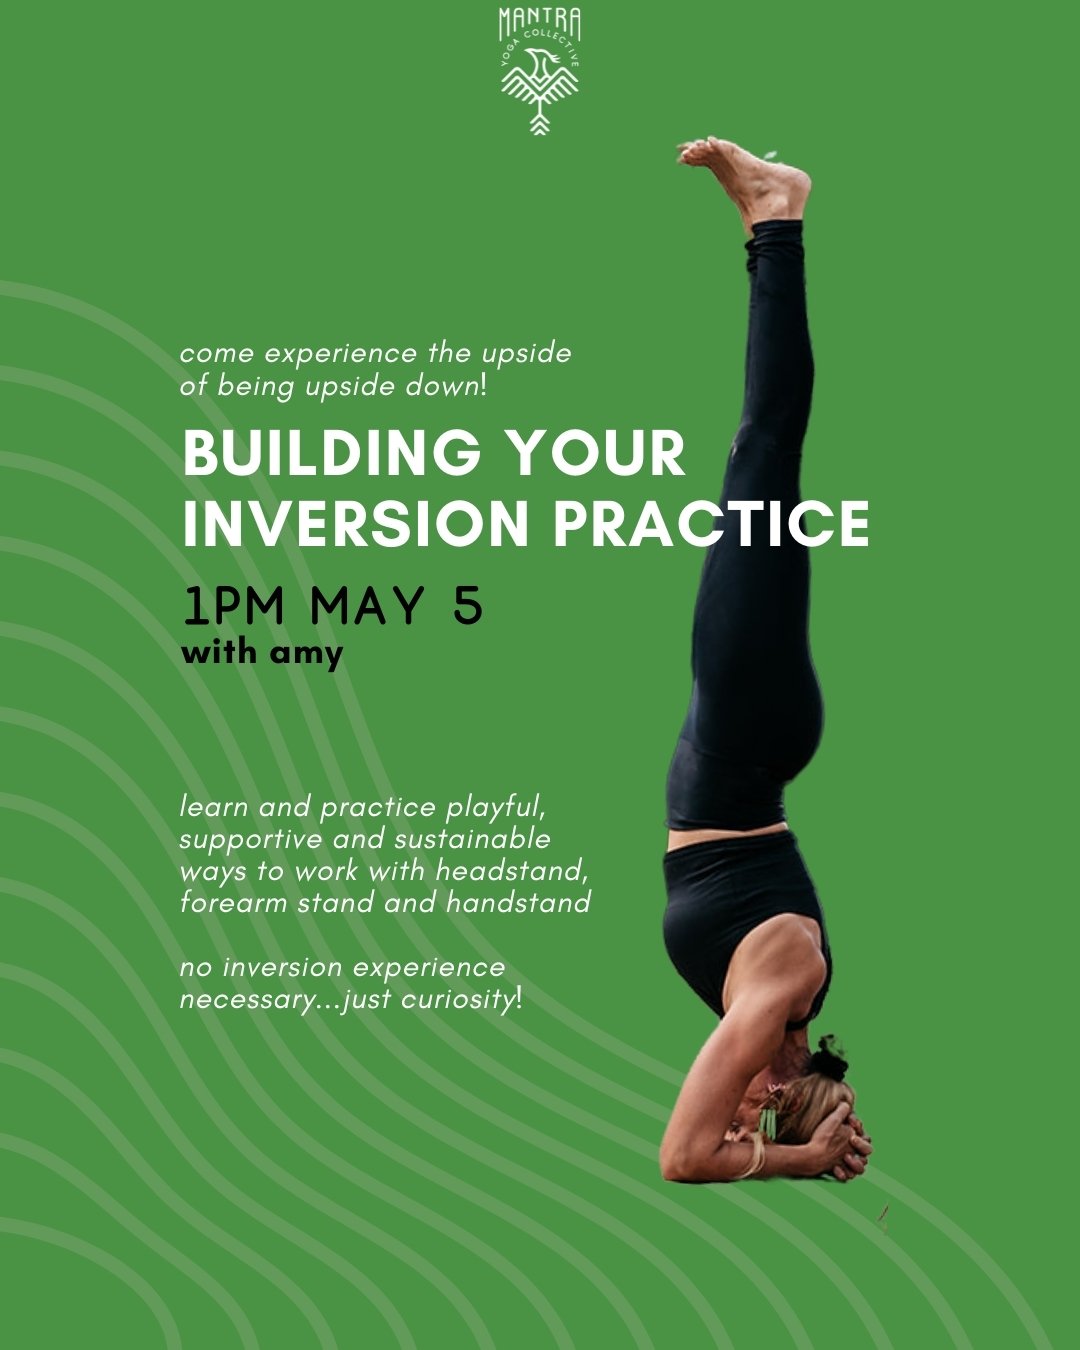 Have you *always* wanted to learn an inversion... but don't know where to start? This is the PERFECT workshop for you! 

There are so many ways to play with inversions &mdash; and Amy will guide you towards an inviting and sustainable way to work wit